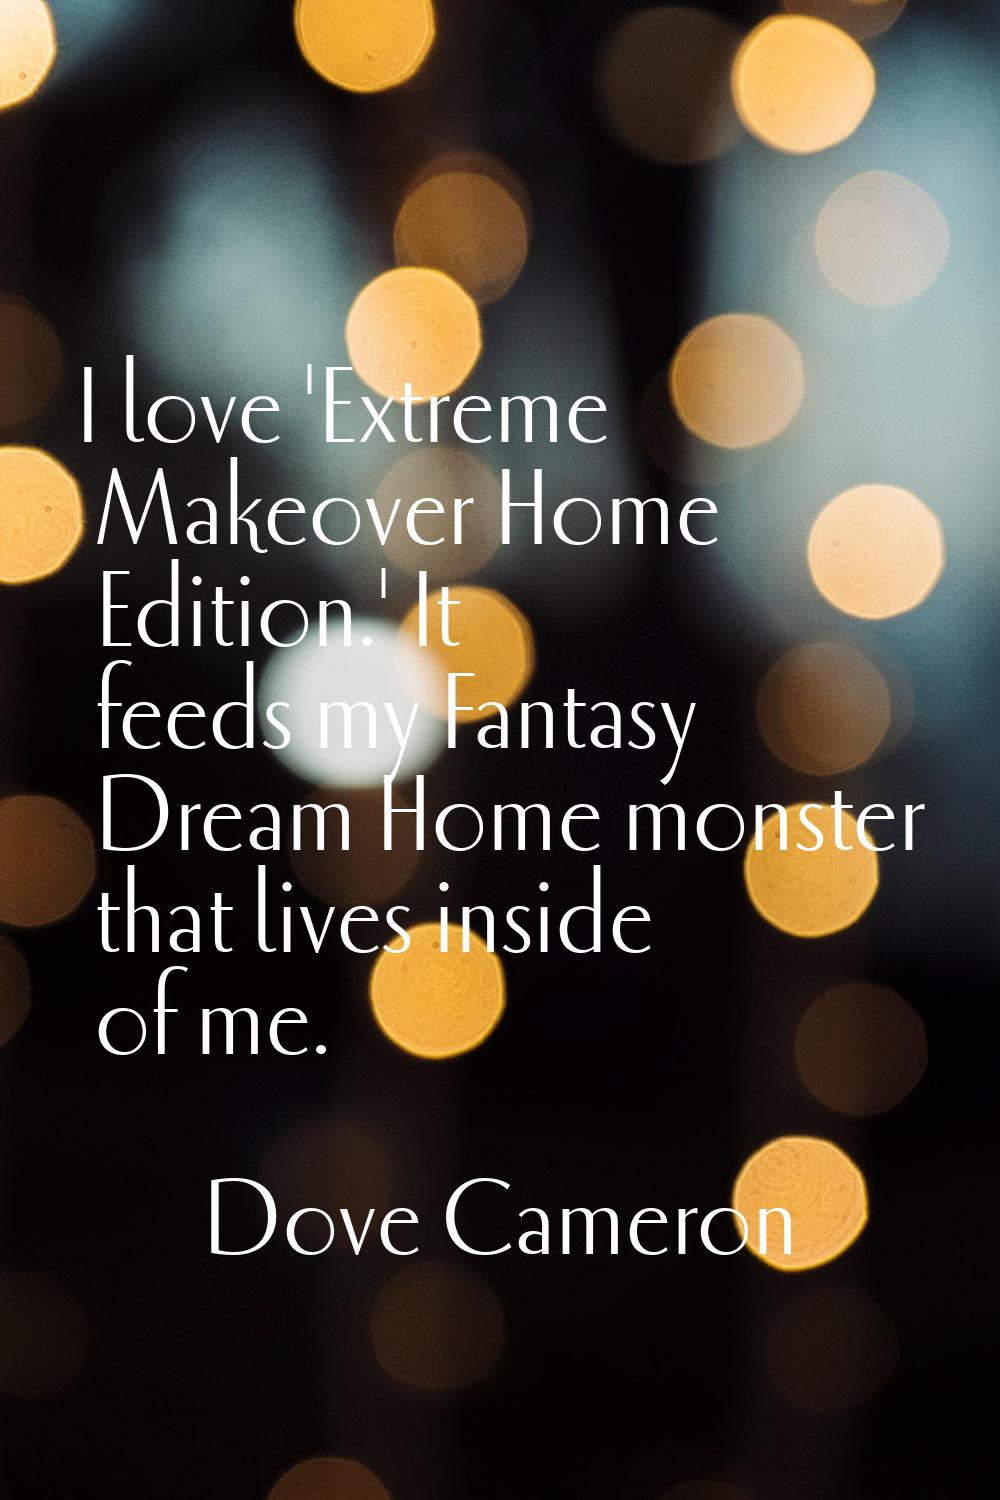 I love 'Extreme Makeover Home Edition.' It feeds my Fantasy Dream Home monster that lives inside of